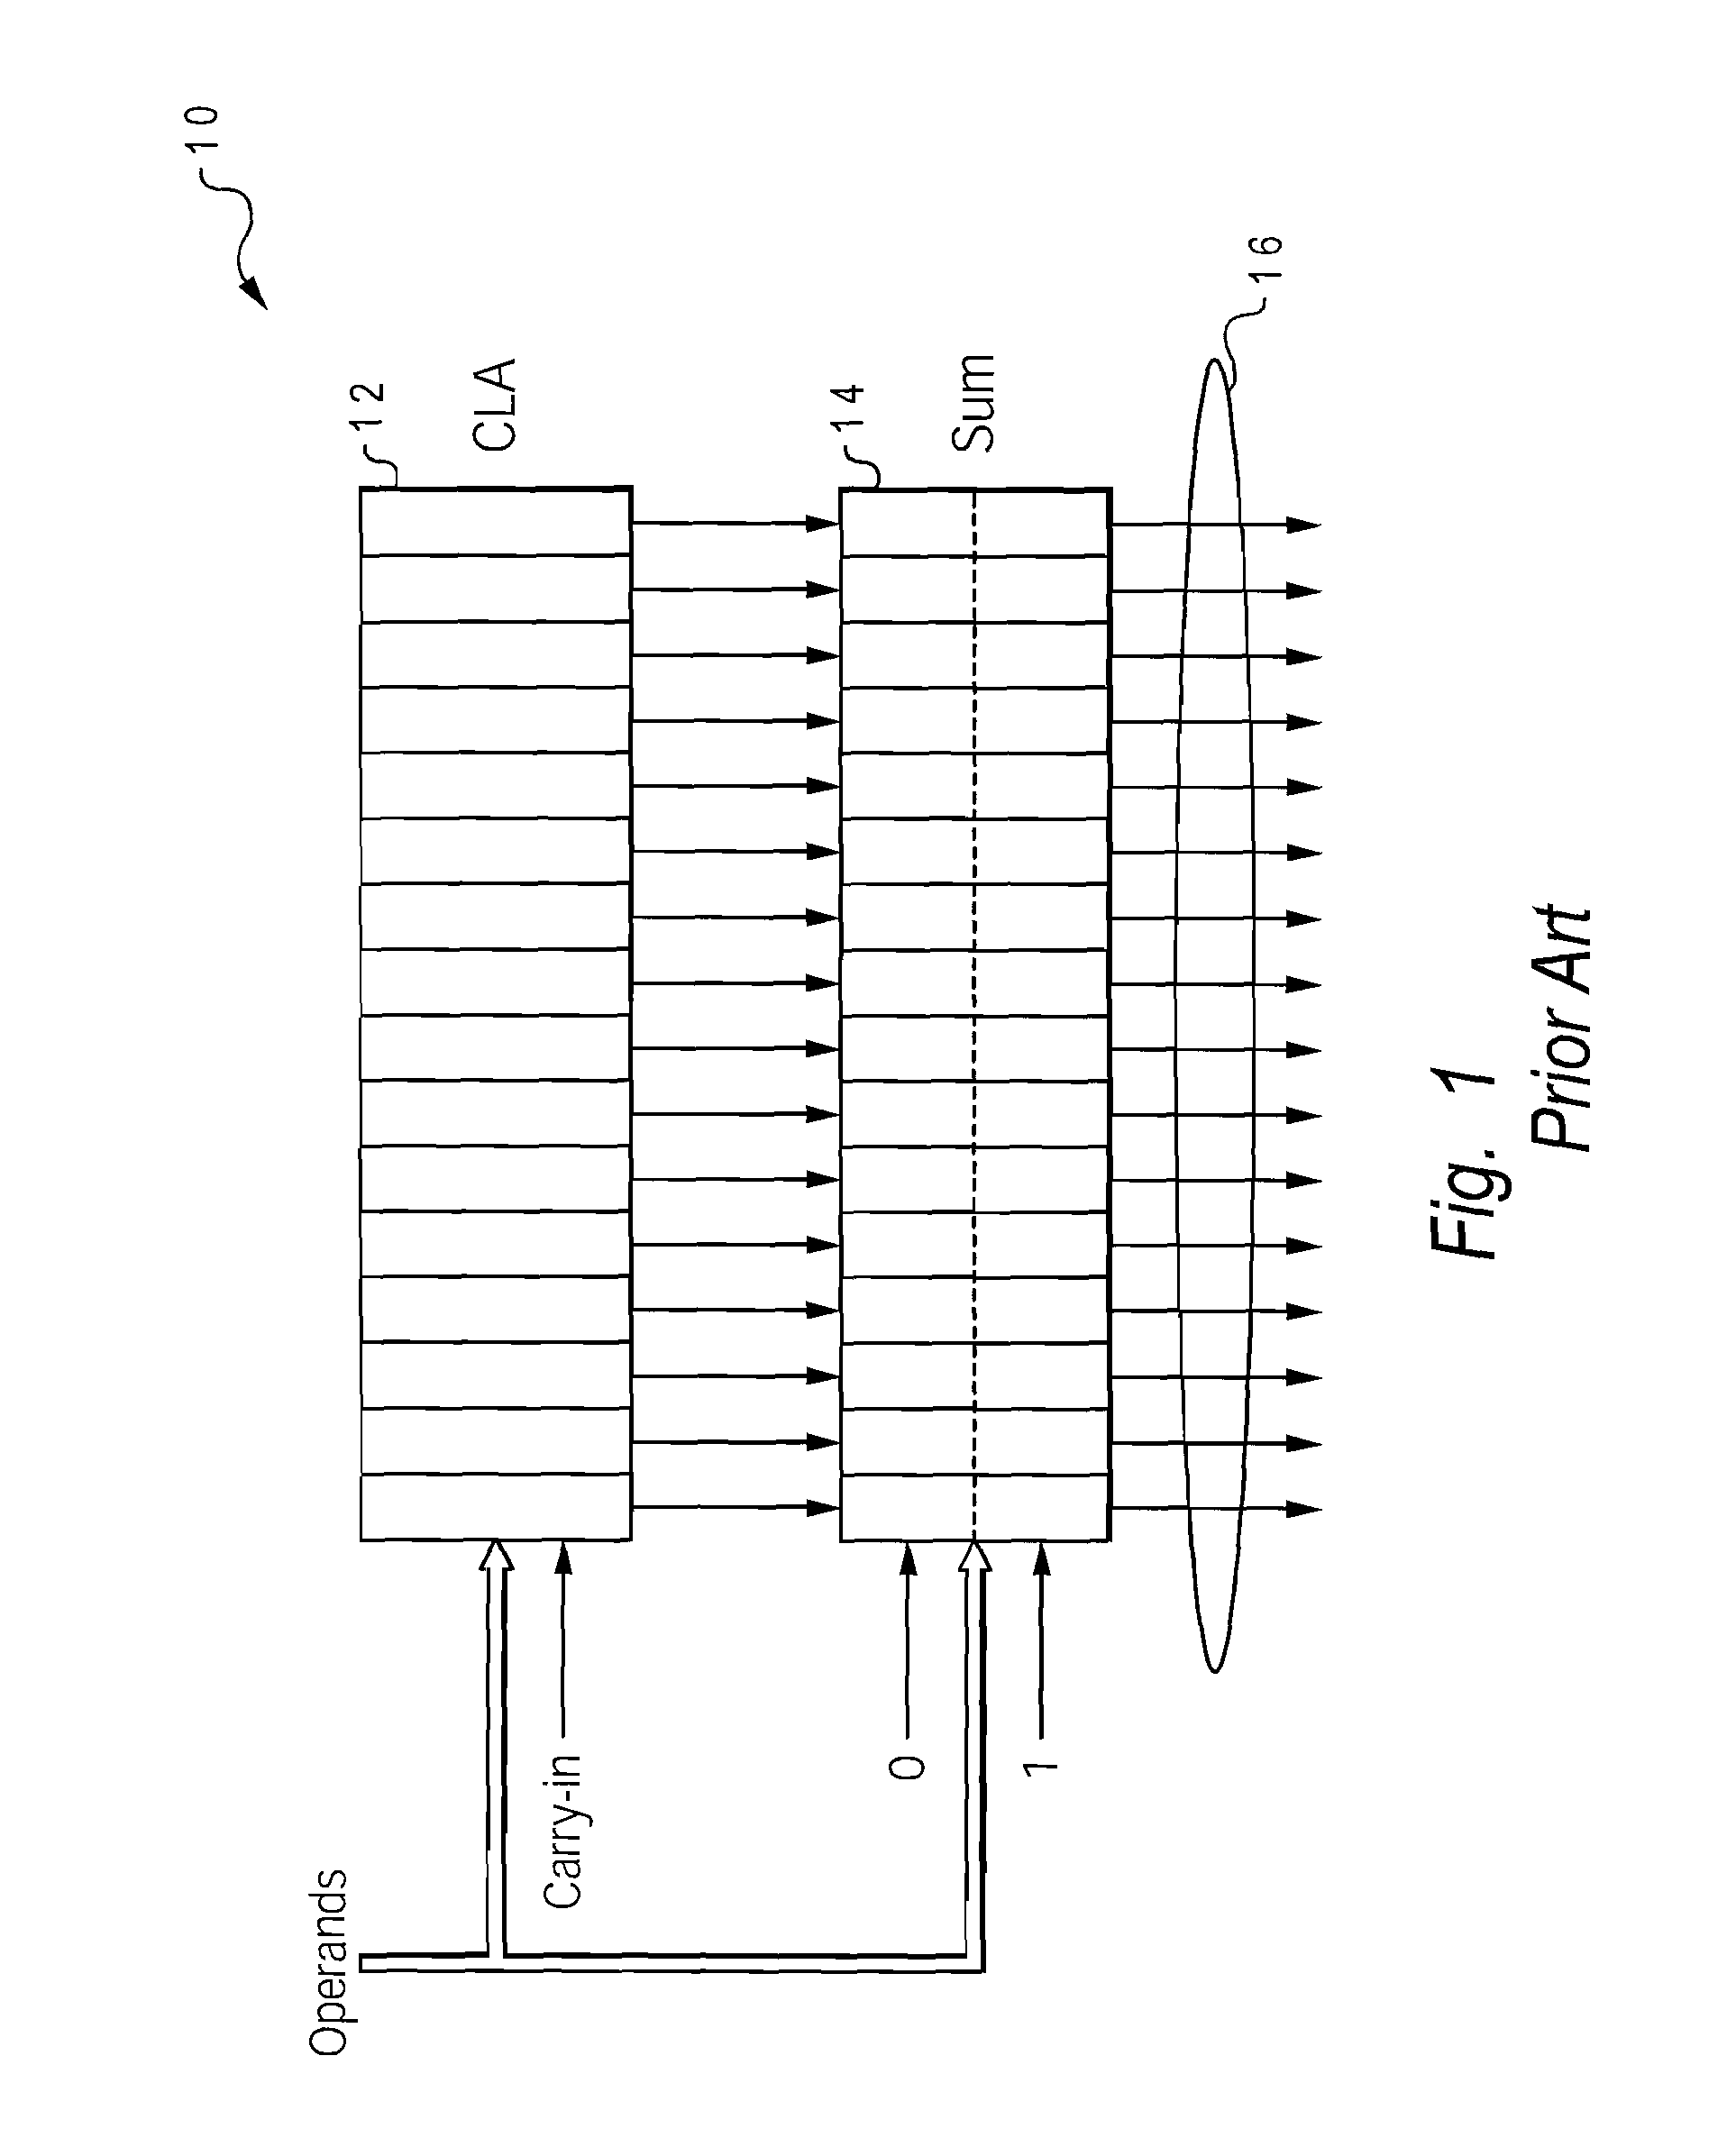 Method of forcing 1's and inverting sum in an adder without incurring timing delay